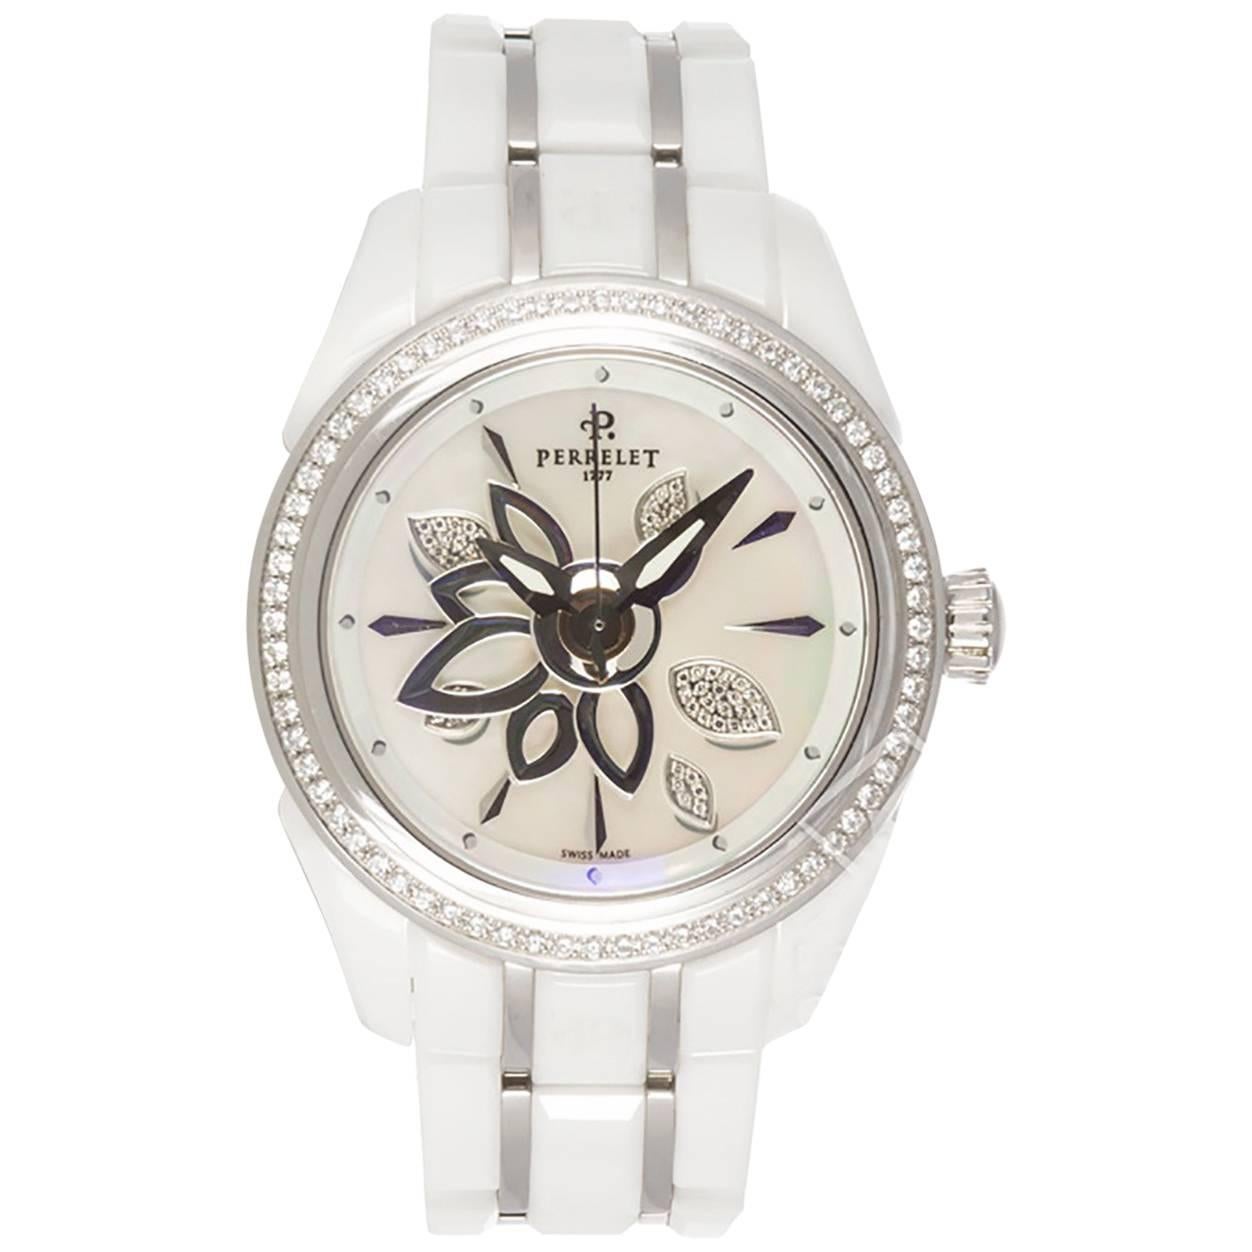 Perrelet ladies White Ceramic Diamond Mother-of-Pearl Dial Automatic wristwatch 